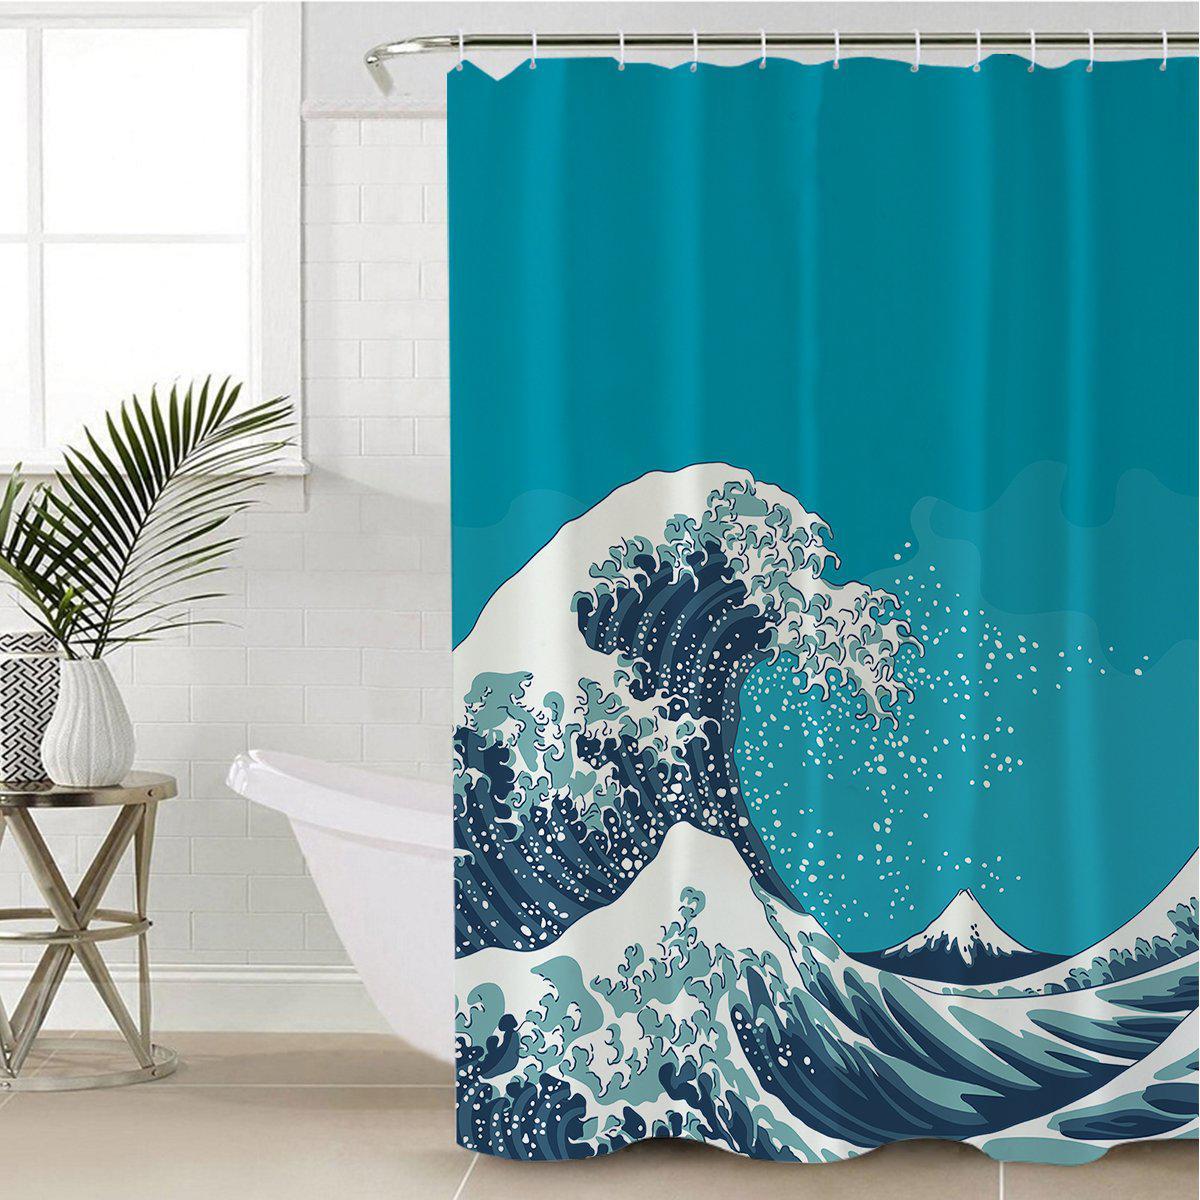 The Great Wave Shower Curtain